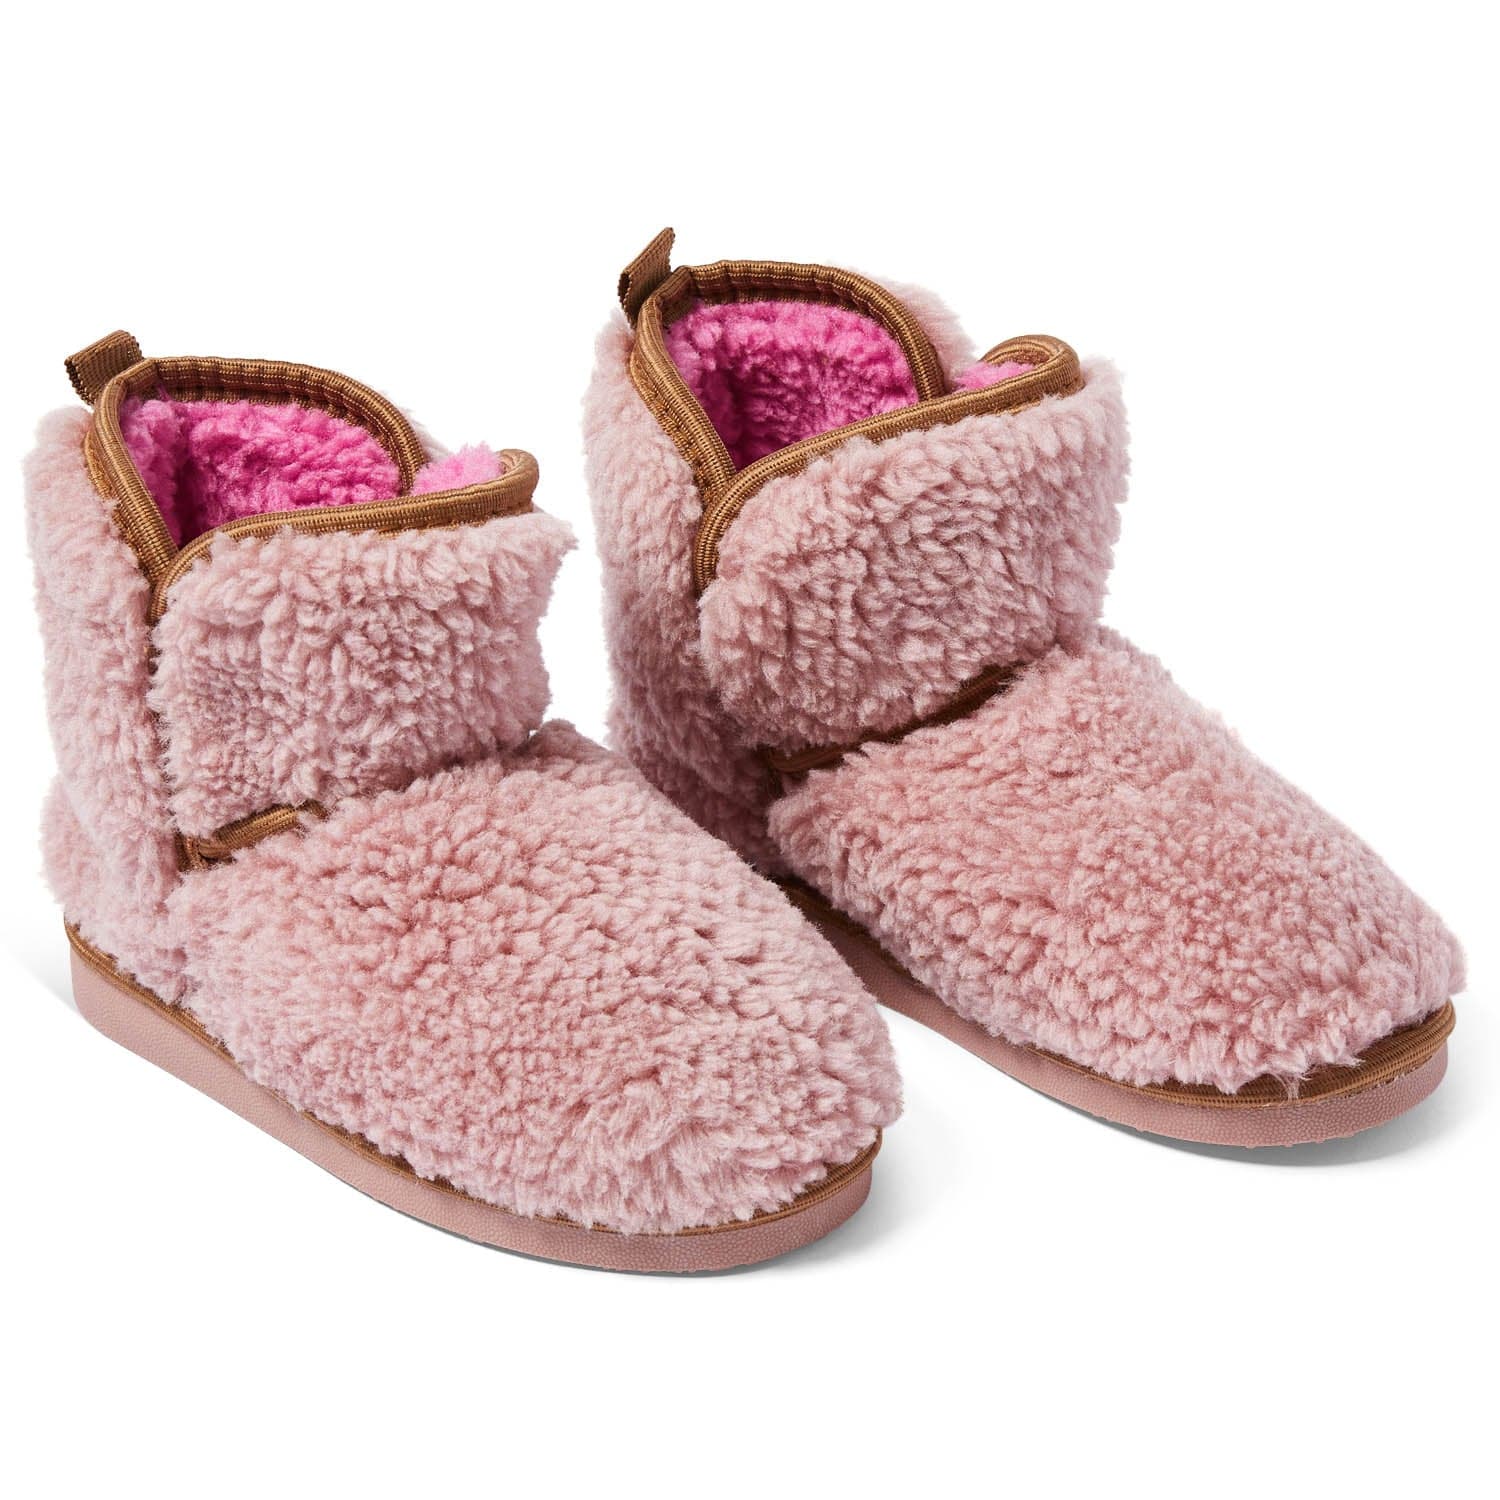 KIP & CO | Roses and Chocolate Boucle Boots KIDS